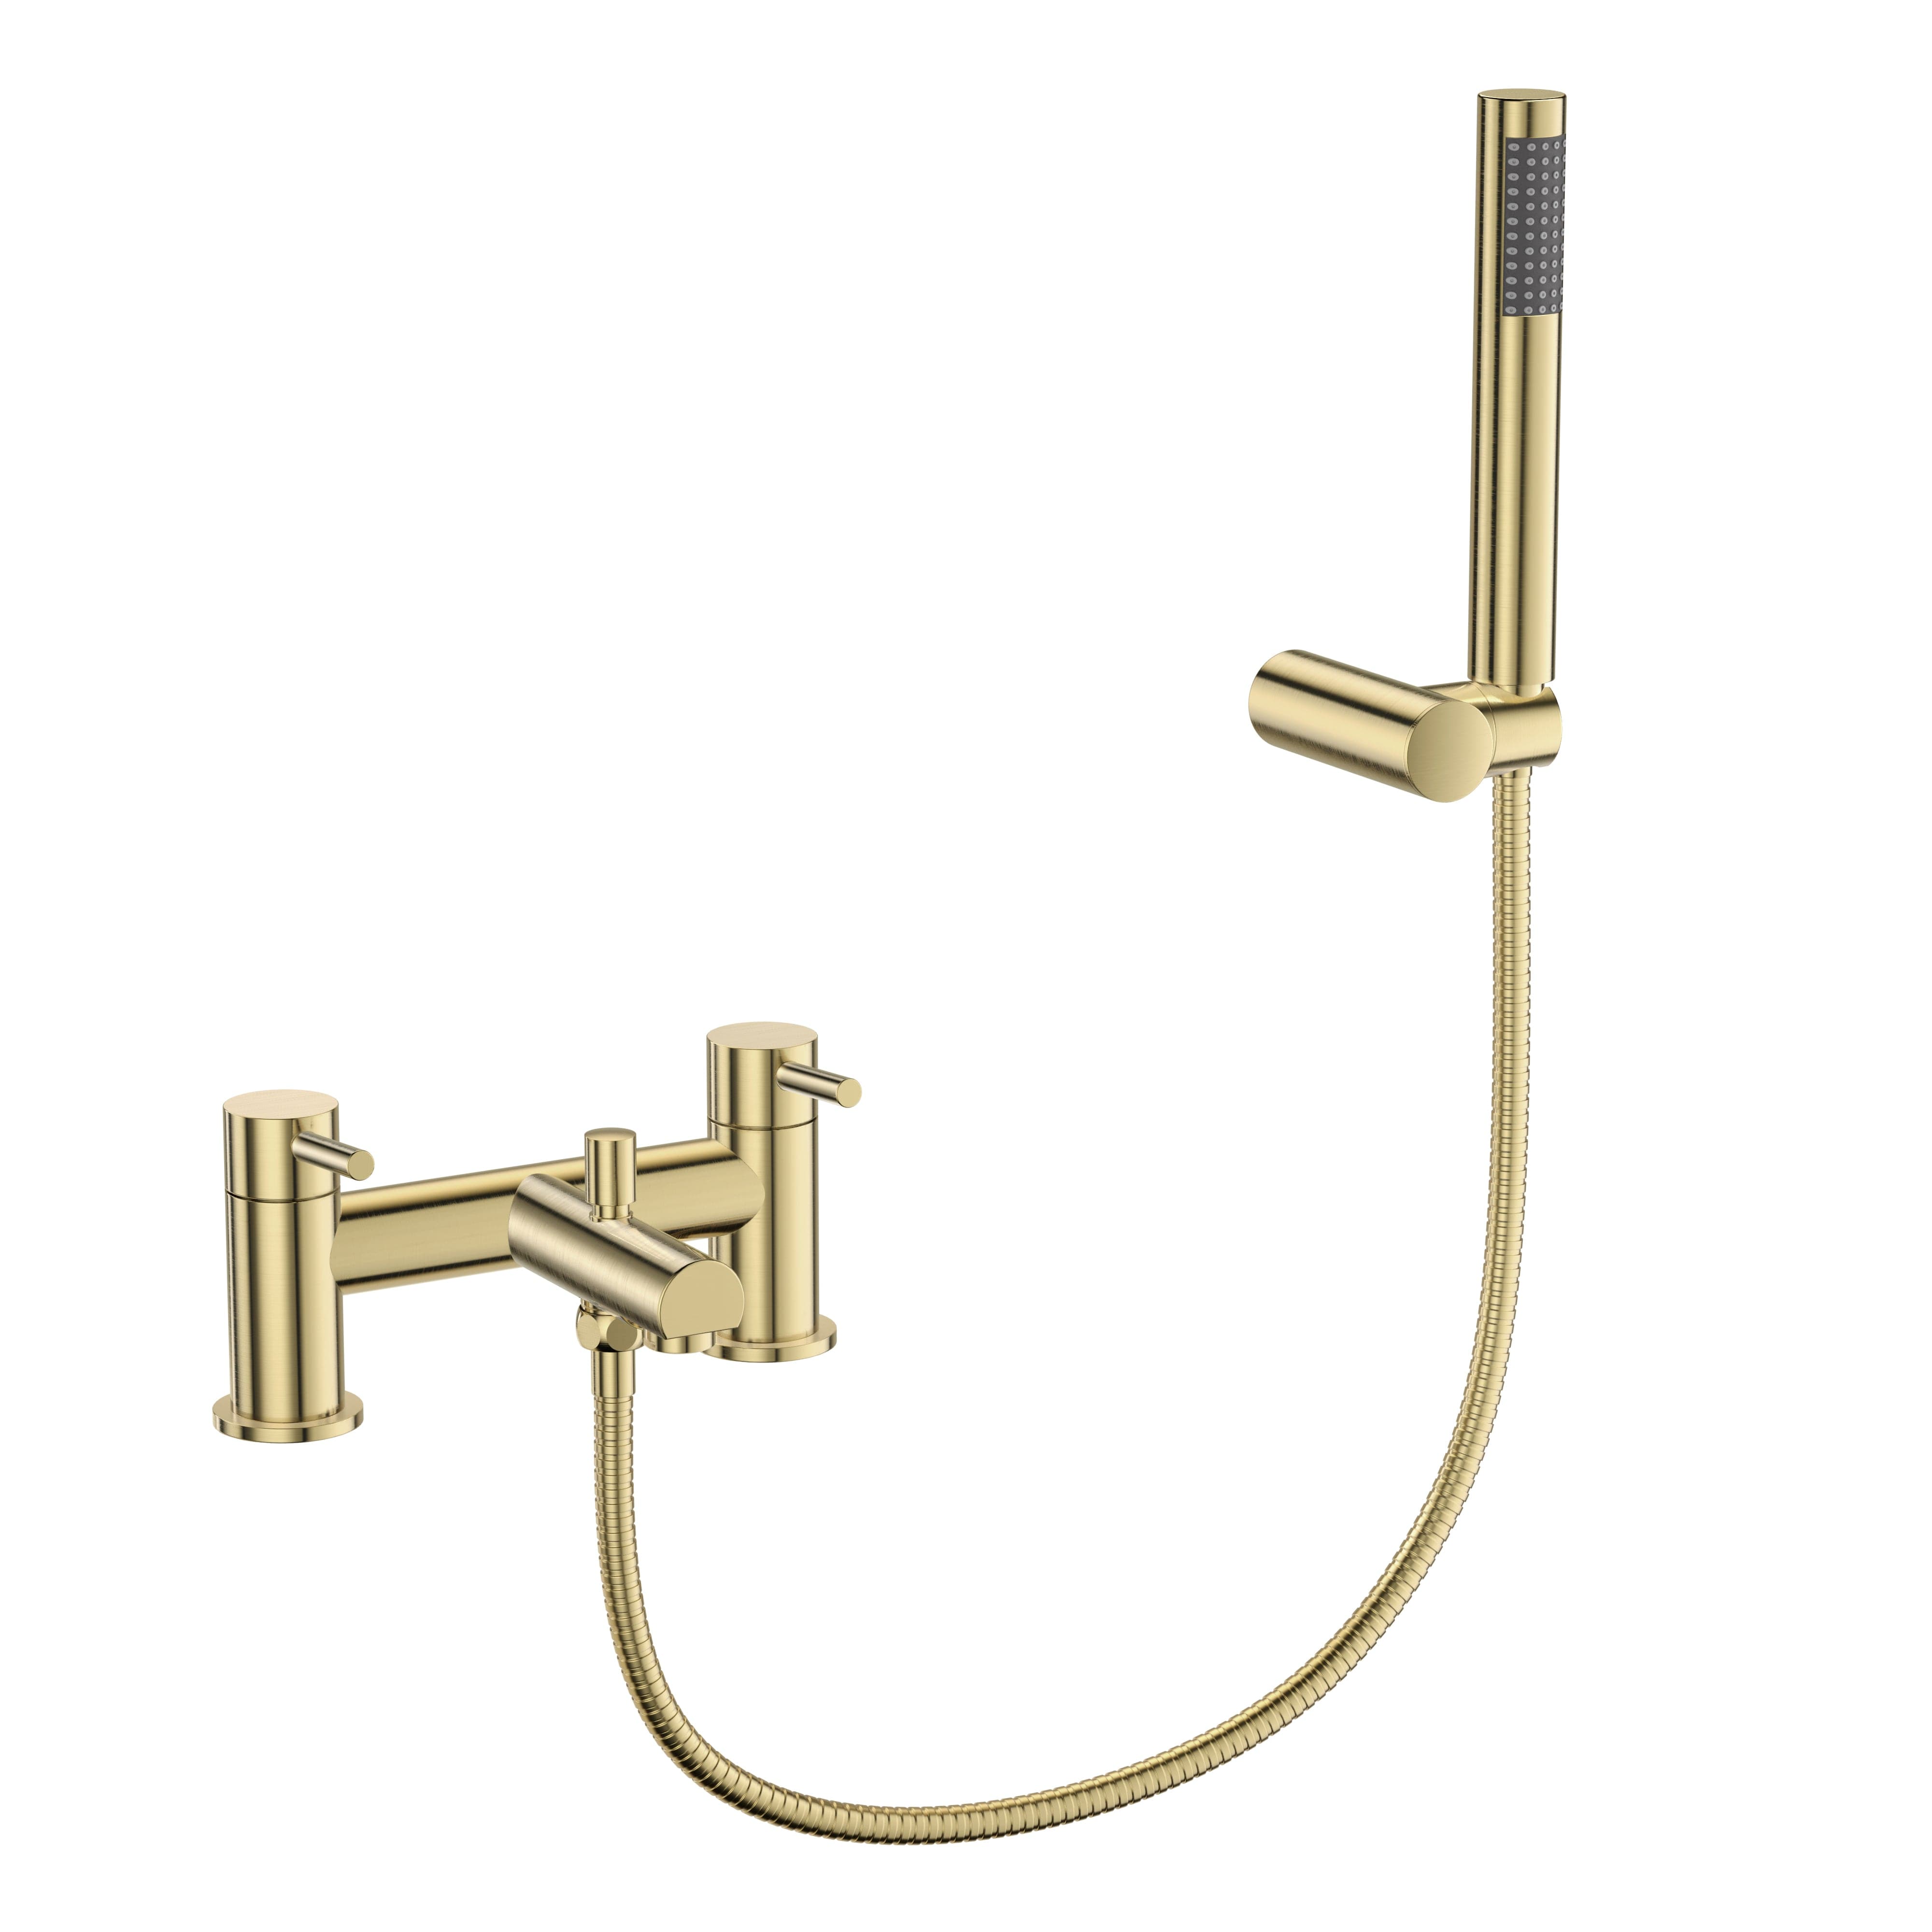 Elegant Dixon Round Lever Bath Shower Mixer Tap in Brushed Brass finish, complete with shower kit. Modern design, high-quality bathroom tap for contemporary UK homes.